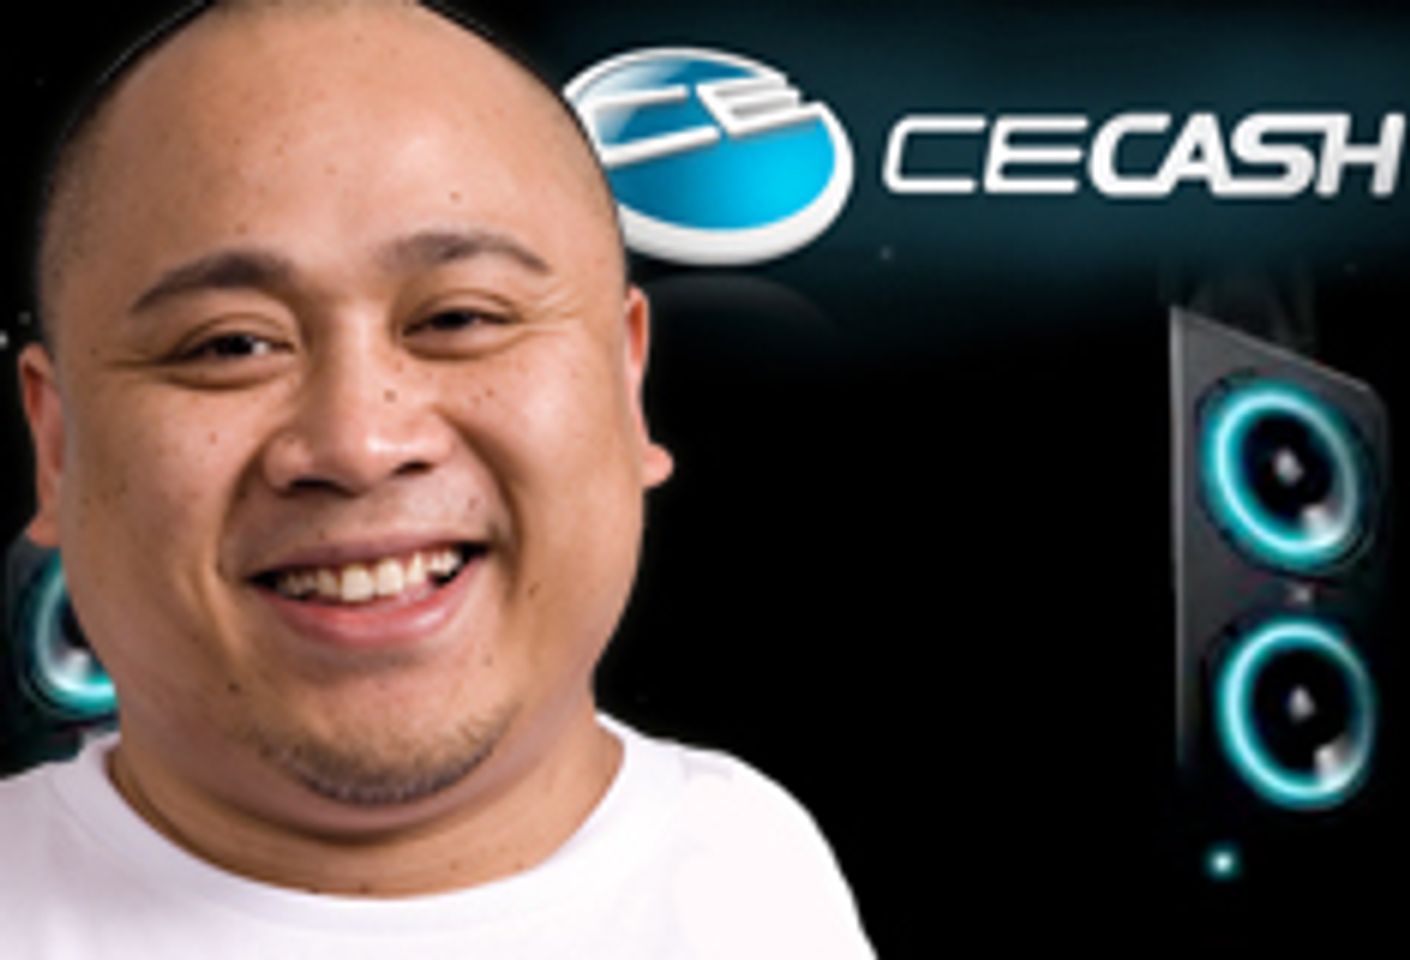 CECash Welcomes CECash Albert as Vice President of Development, Strategy